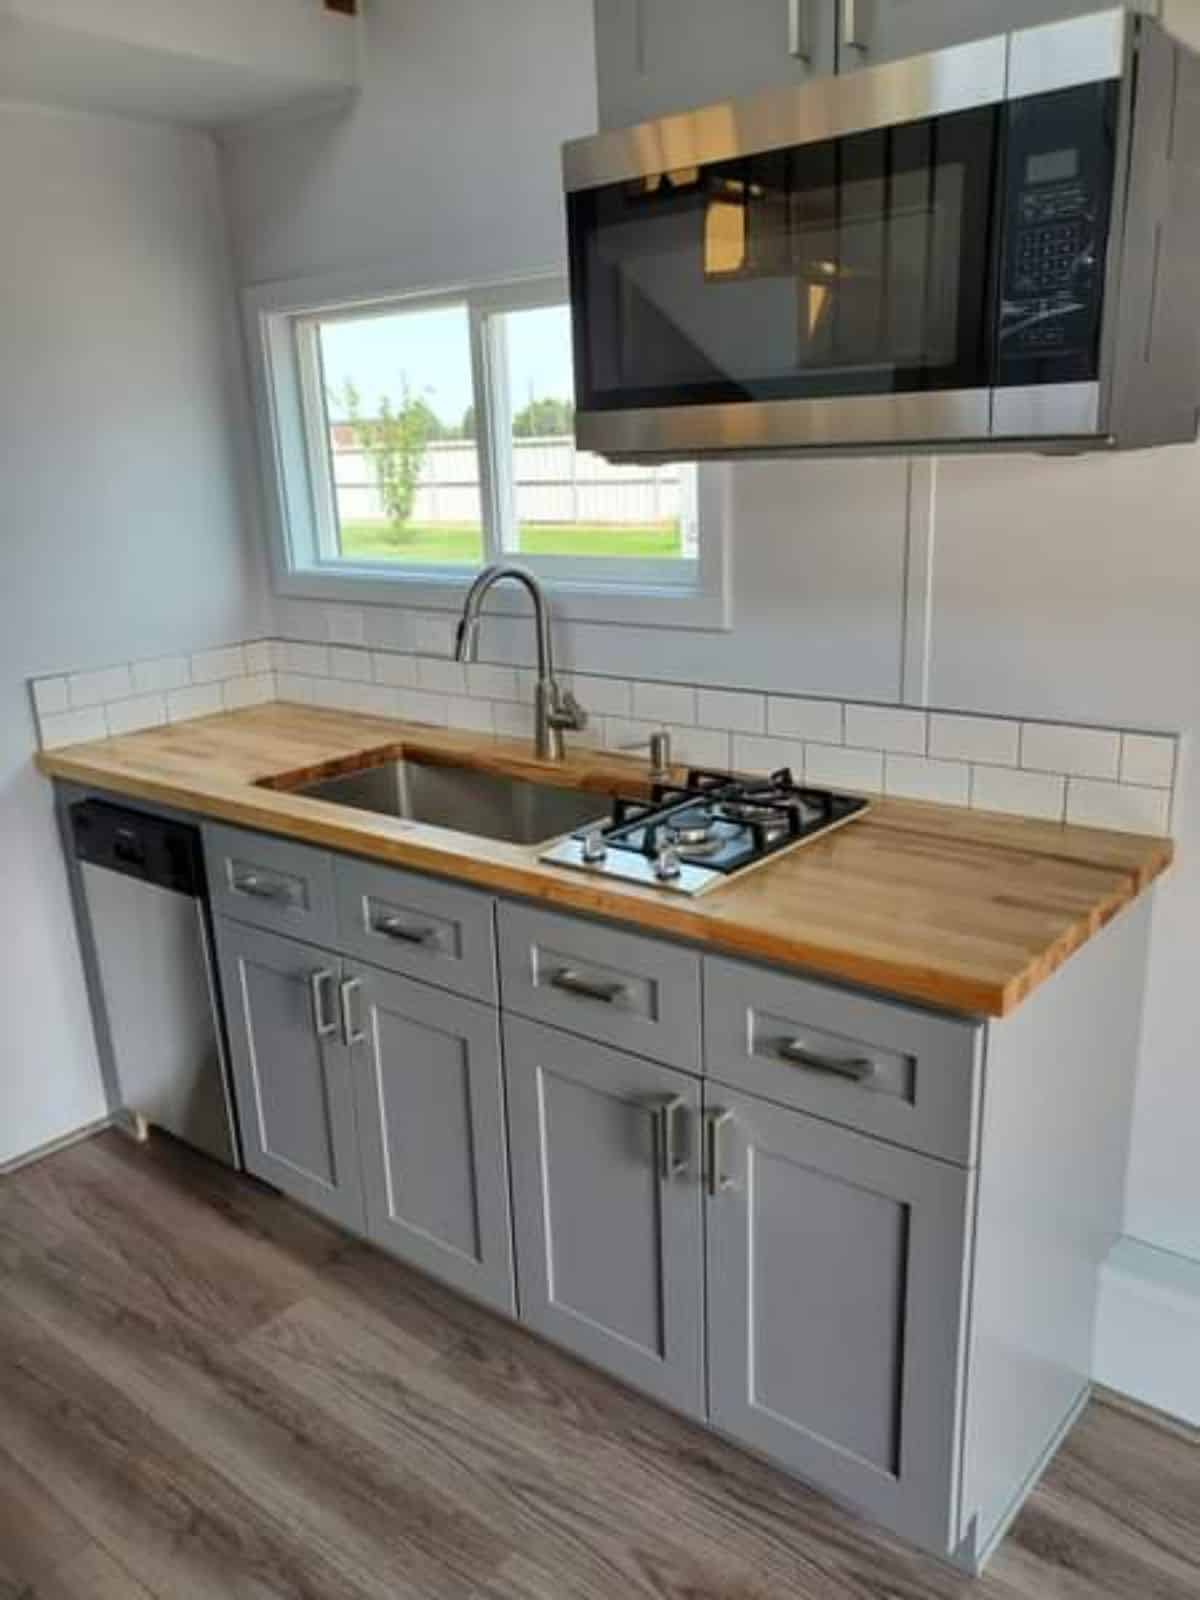 Well organized kitchen area of Brand-New Tiny Home